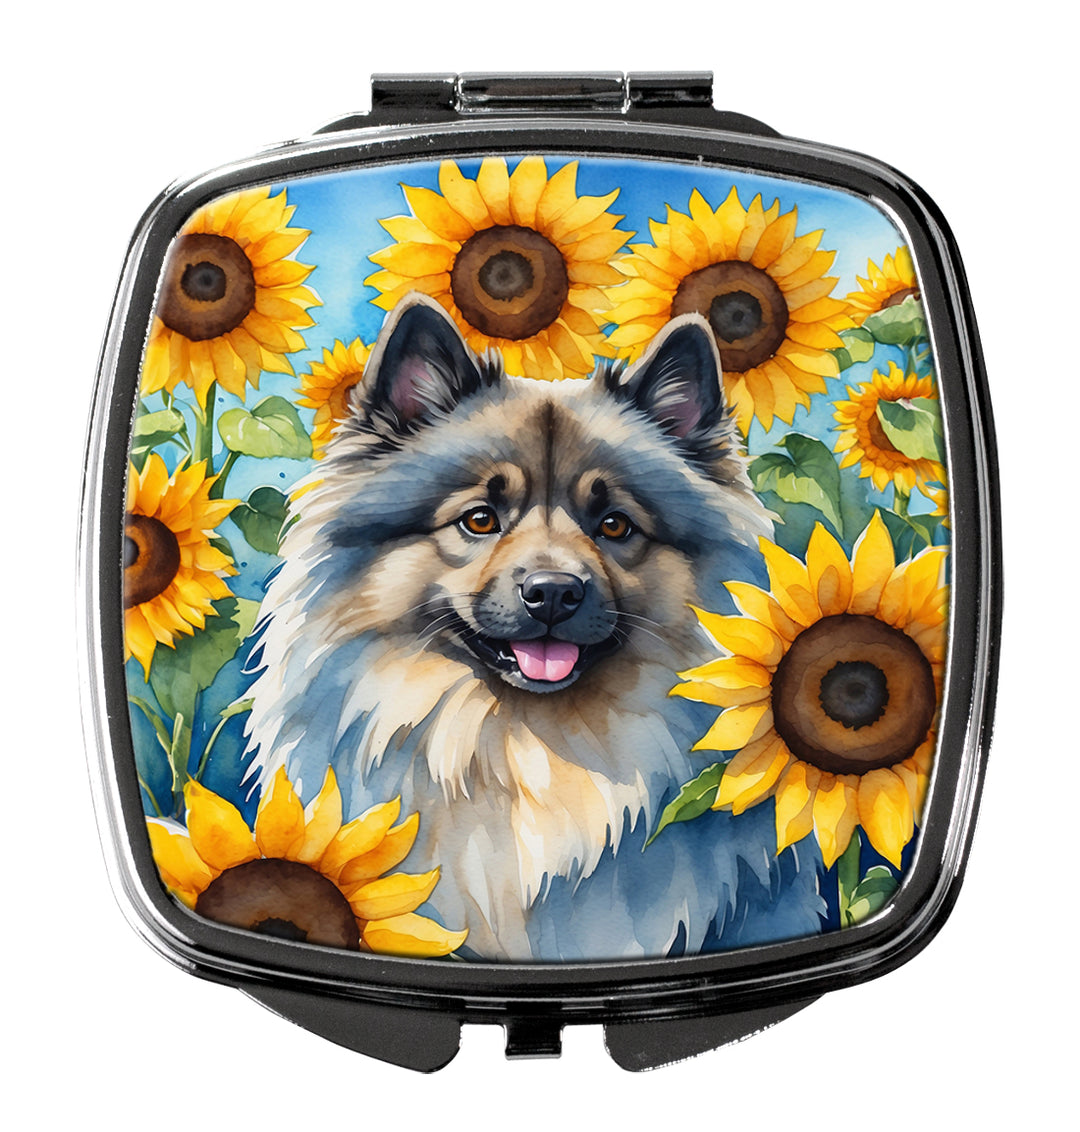 Keeshond in Sunflowers Compact Mirror Image 1